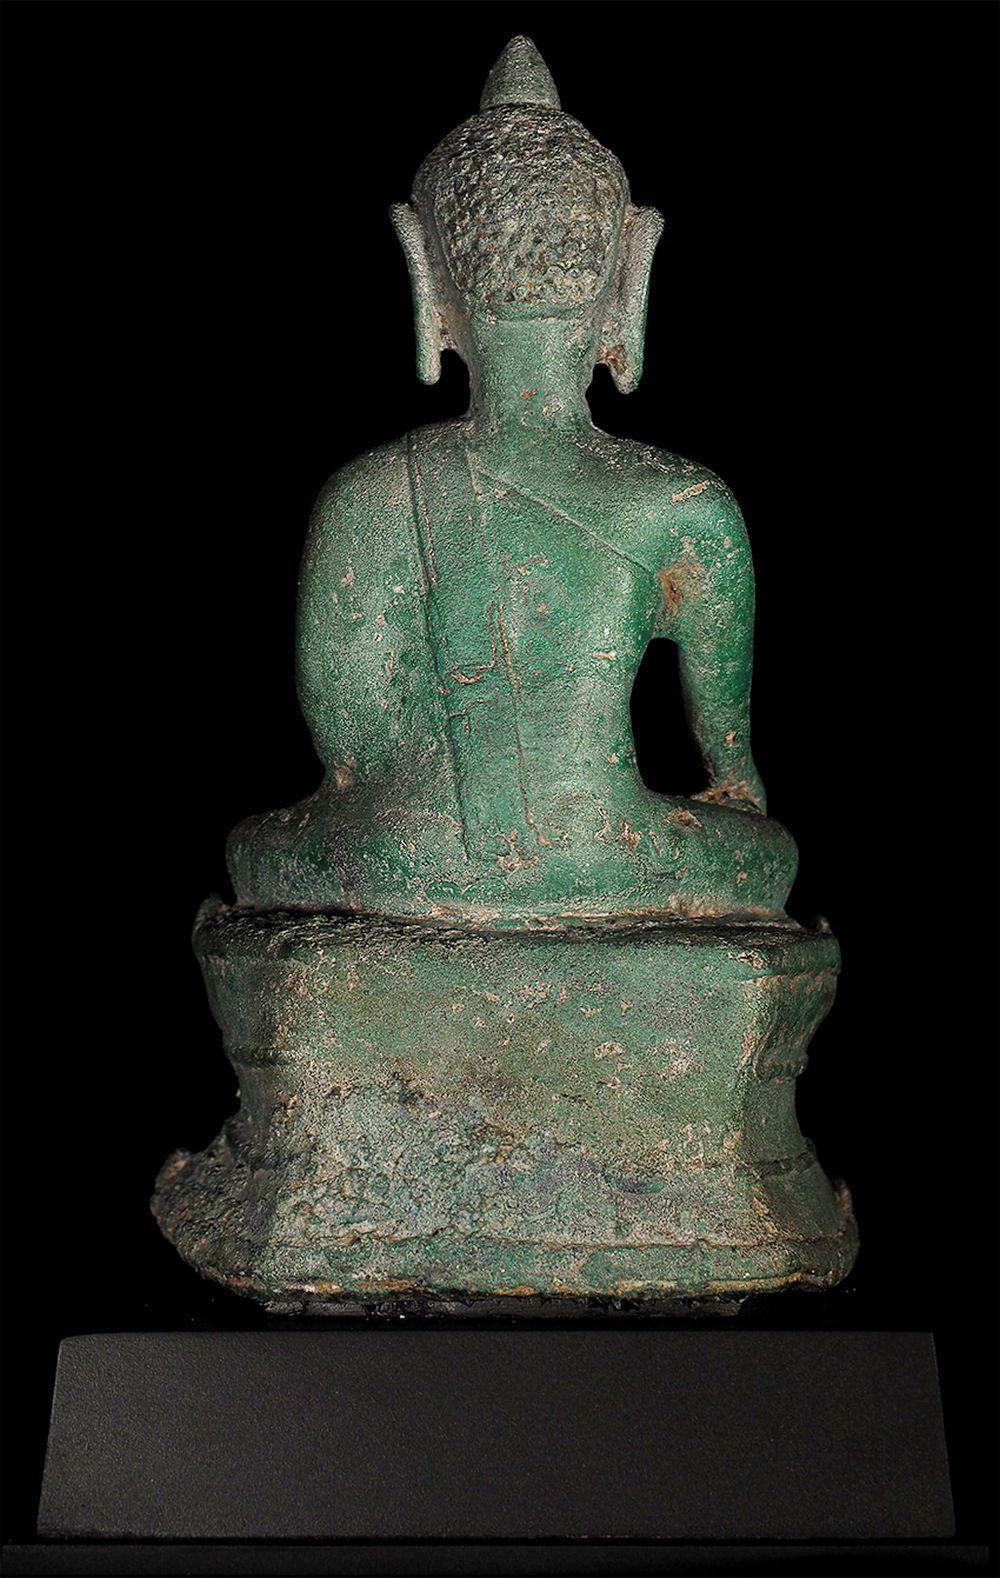 One of my all-time favorites out of more than 10 thousand of Buddhas I have owned over the past 3+ decades. I believe this is a transitional piece that is late-Pyu and contemporary with the Pagan period, although I have never seen another like it.